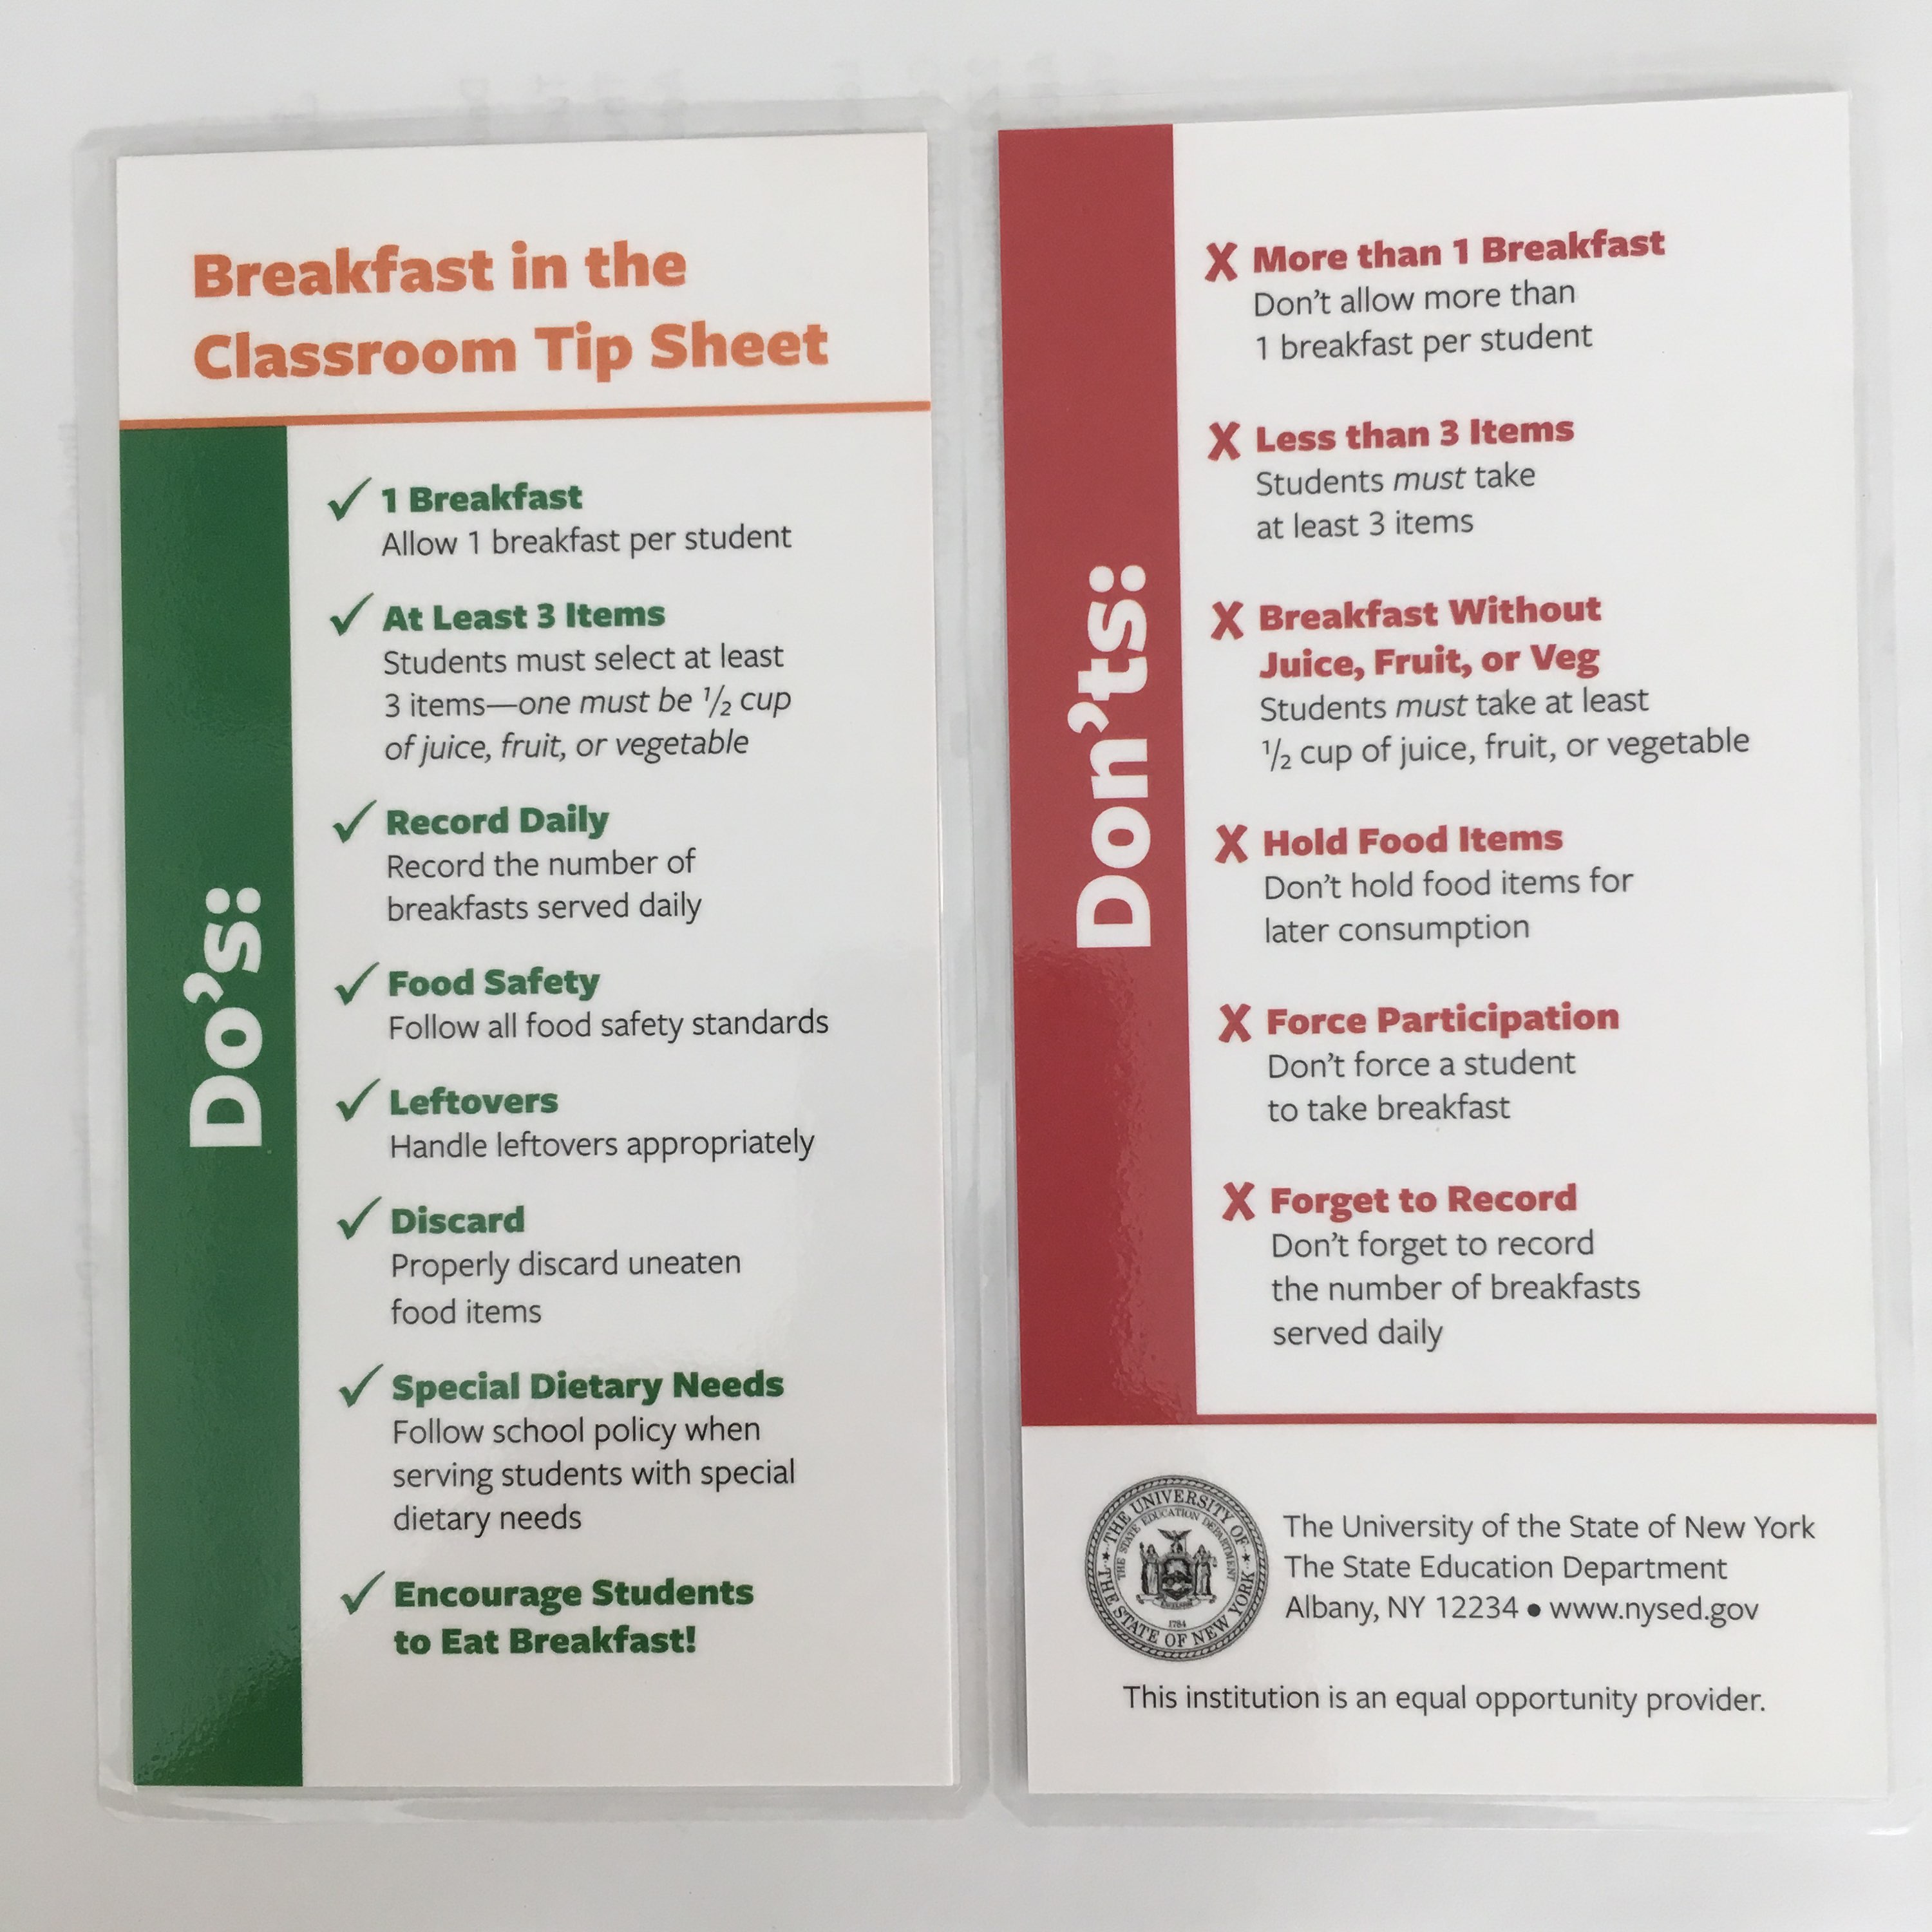 Laminated list of Do's and Don'ts when conducting breakfast in the classroom.